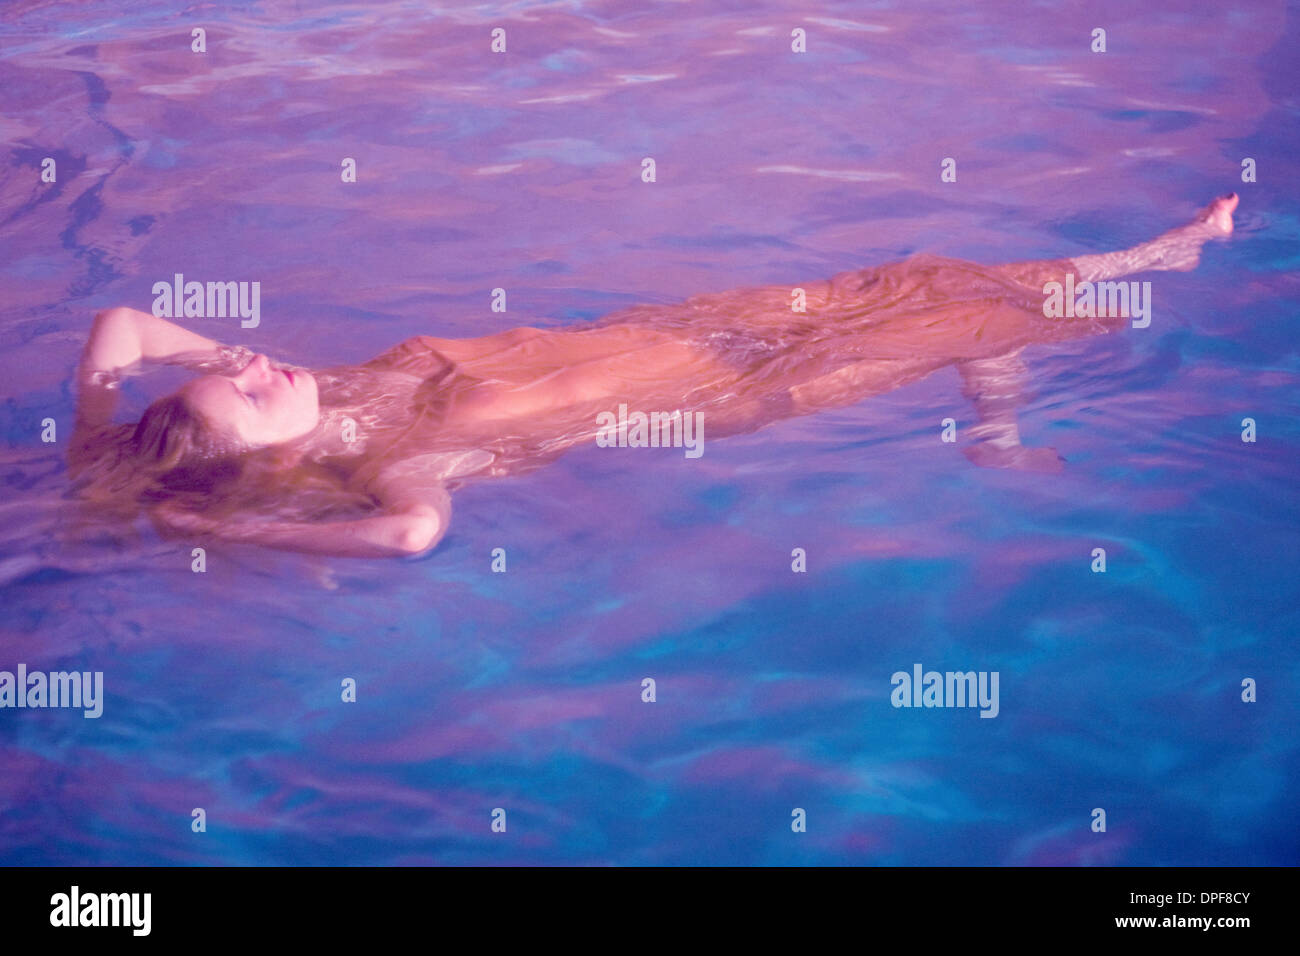 https://c8.alamy.com/comp/DPF8CY/young-woman-swimming-underwater-in-pool-in-underwear-DPF8CY.jpg